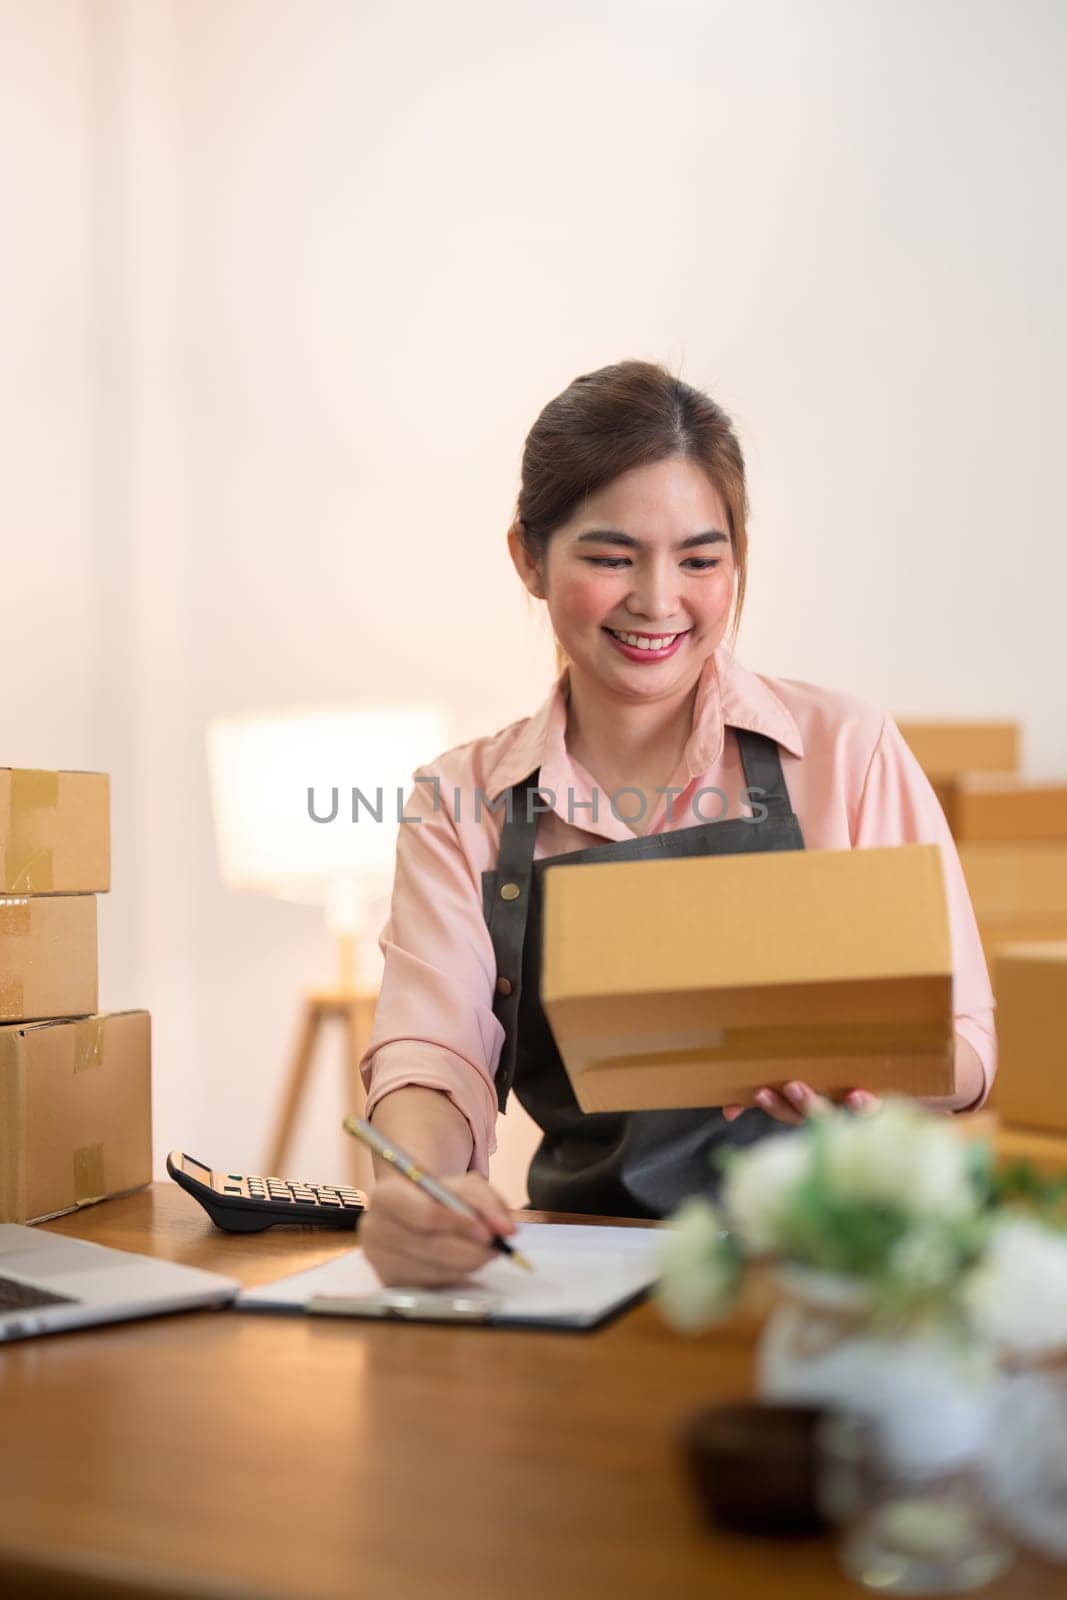 Young woman working online ecommerce shopping at her shop. Young woman sell prepare parcel box of product for deliver to customer. Online selling, ecommerce. Selling products online by nateemee